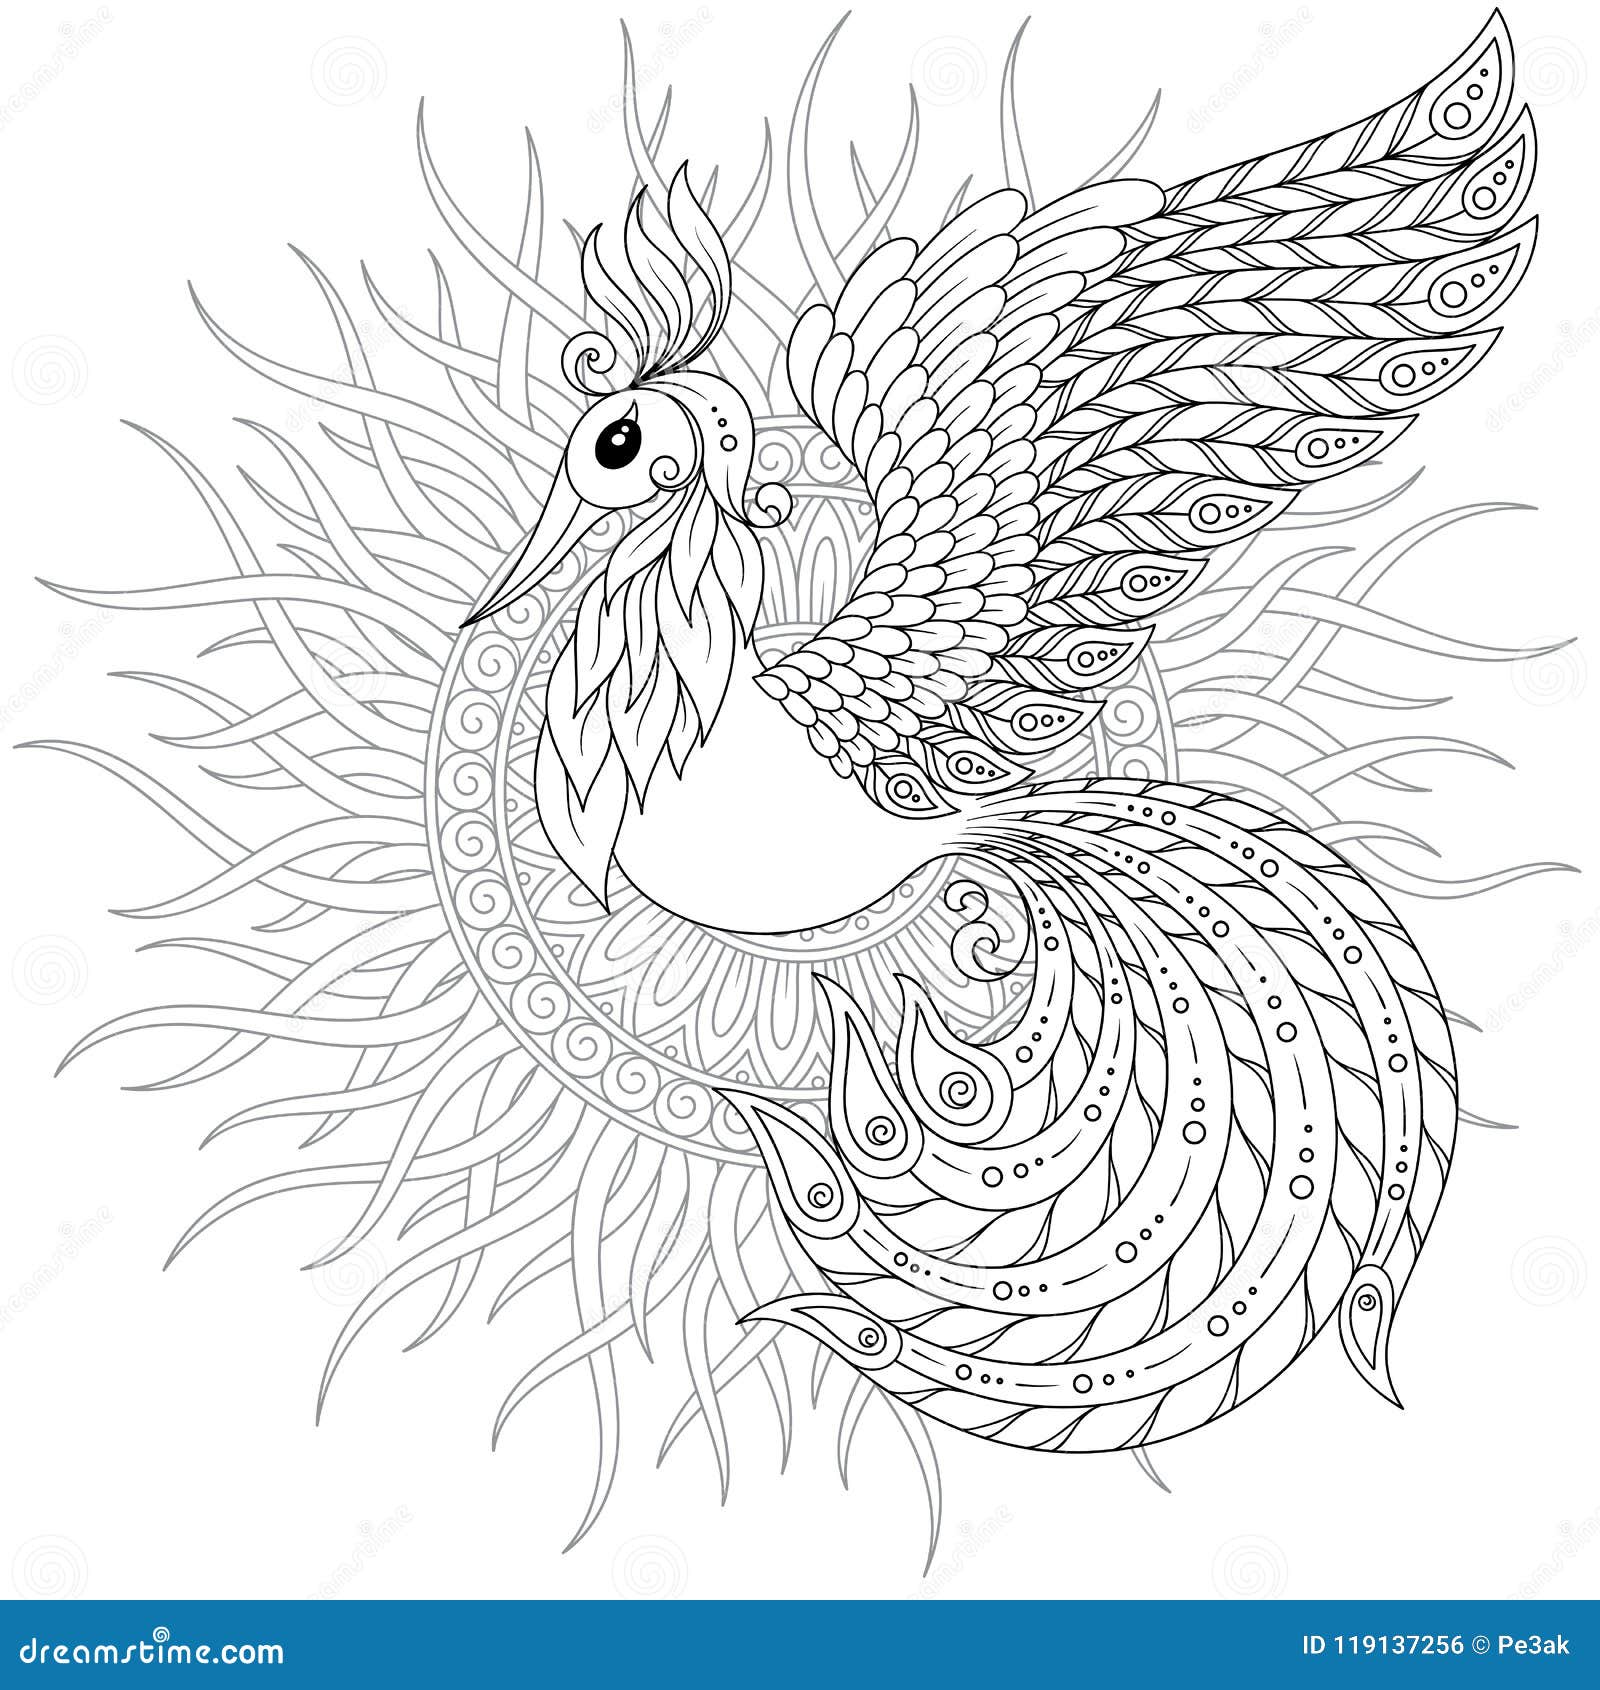 Download Firebird For Anti Stress Coloring Page With High Details ...